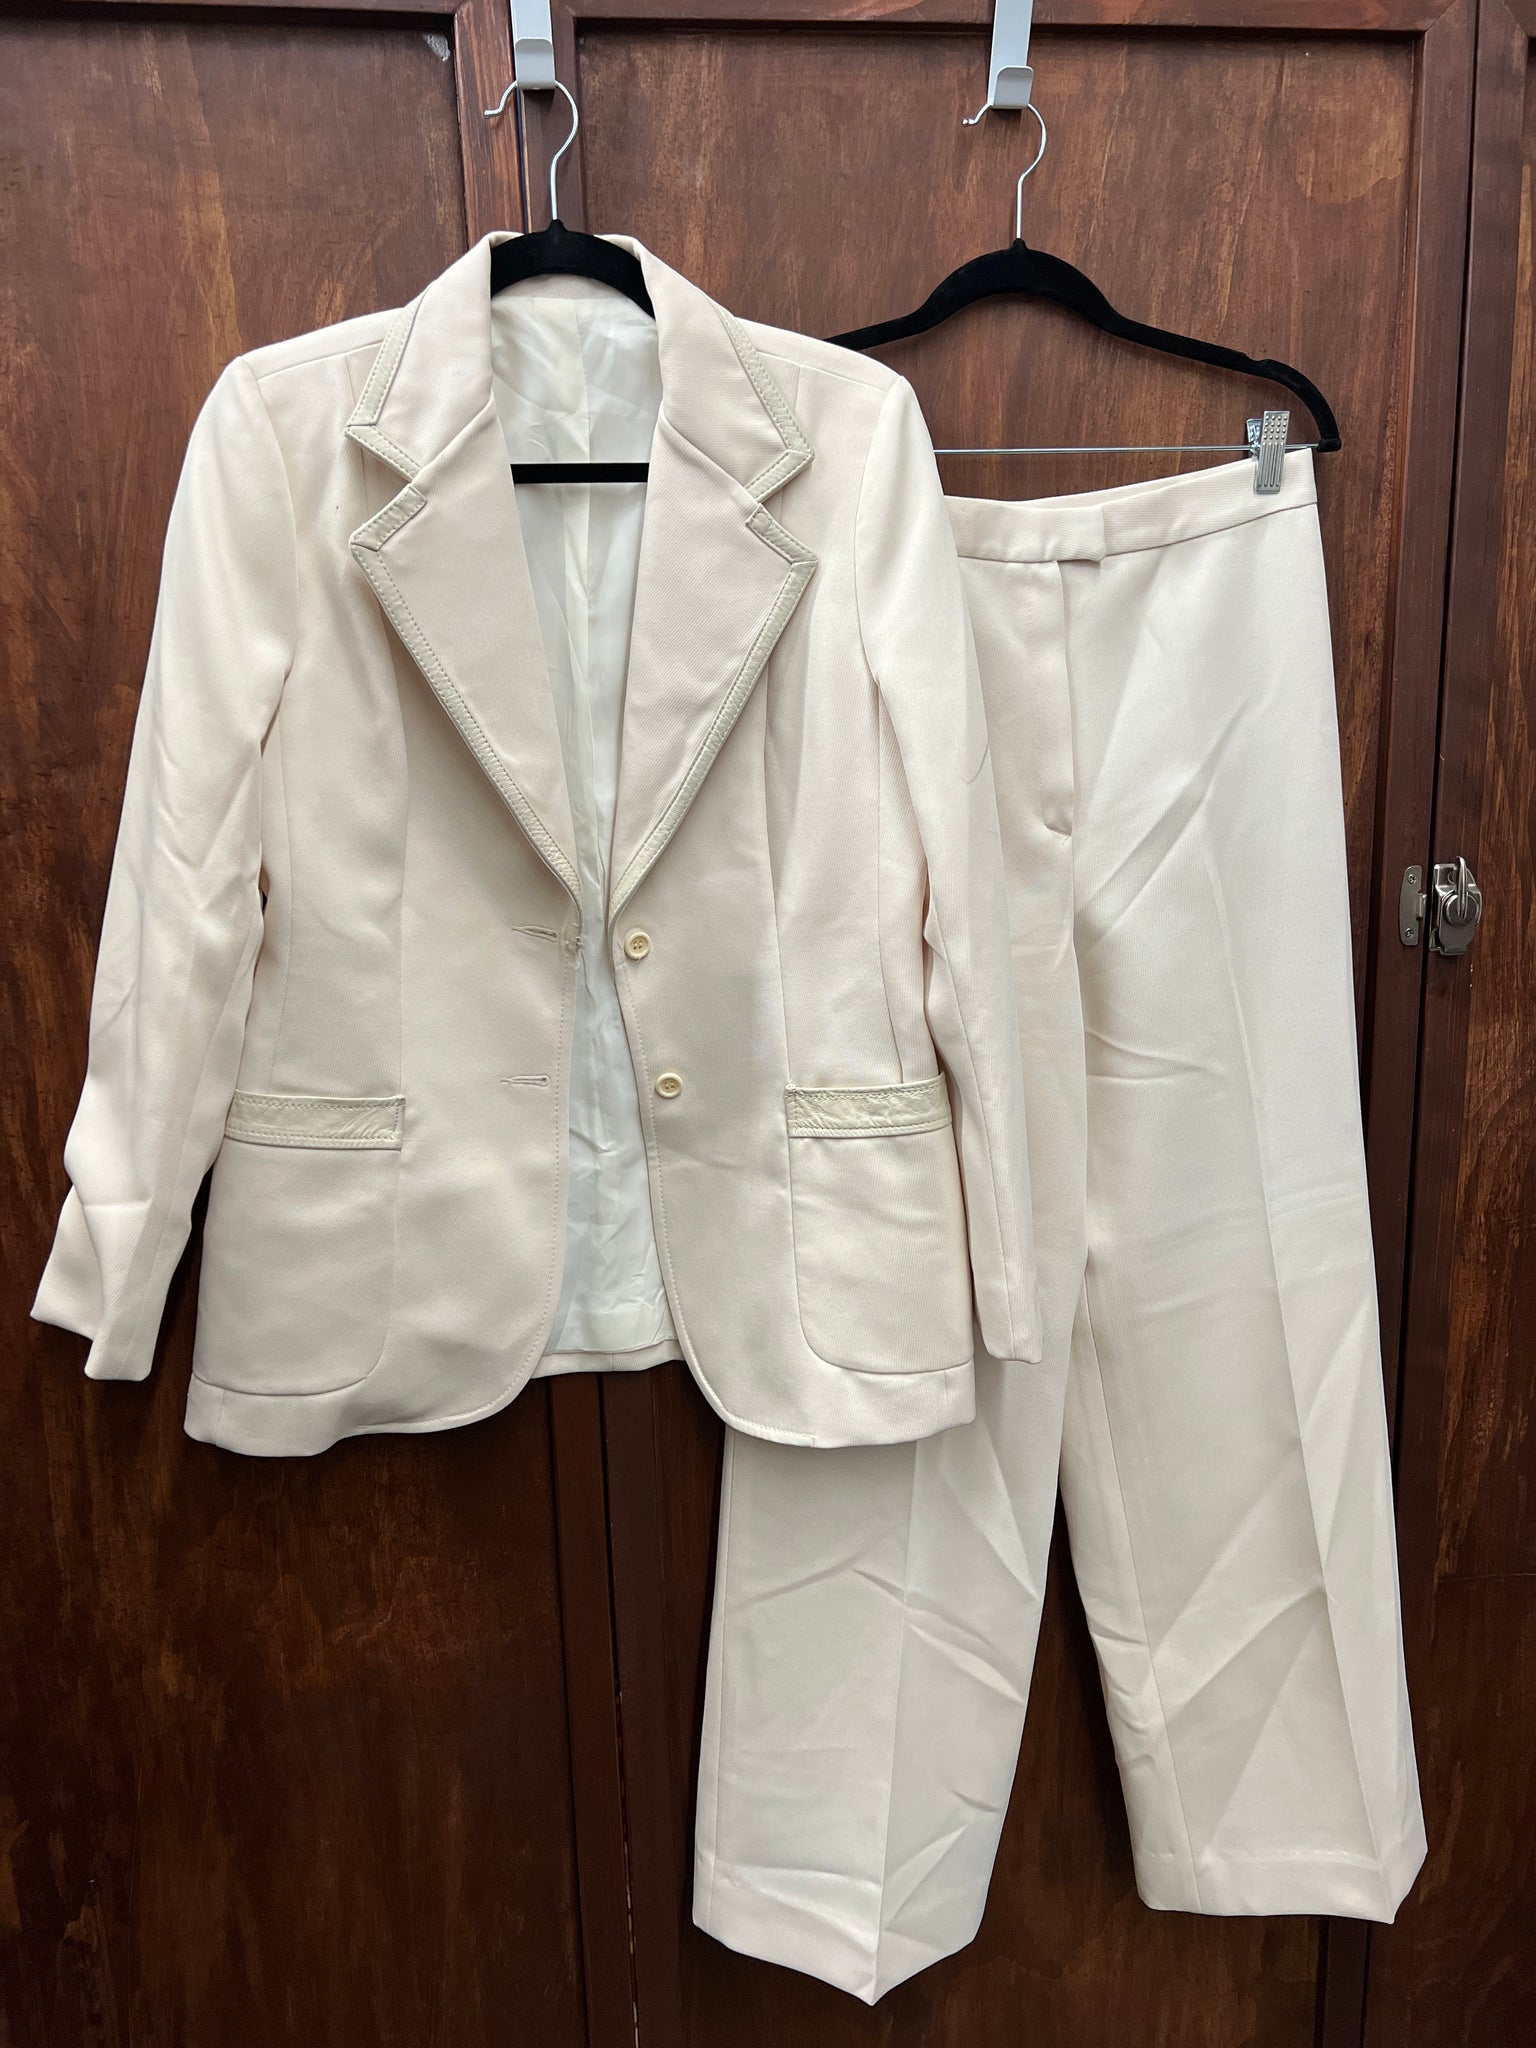 1970s Two PIECE- PANT SUIT- cream with leather details flare leg